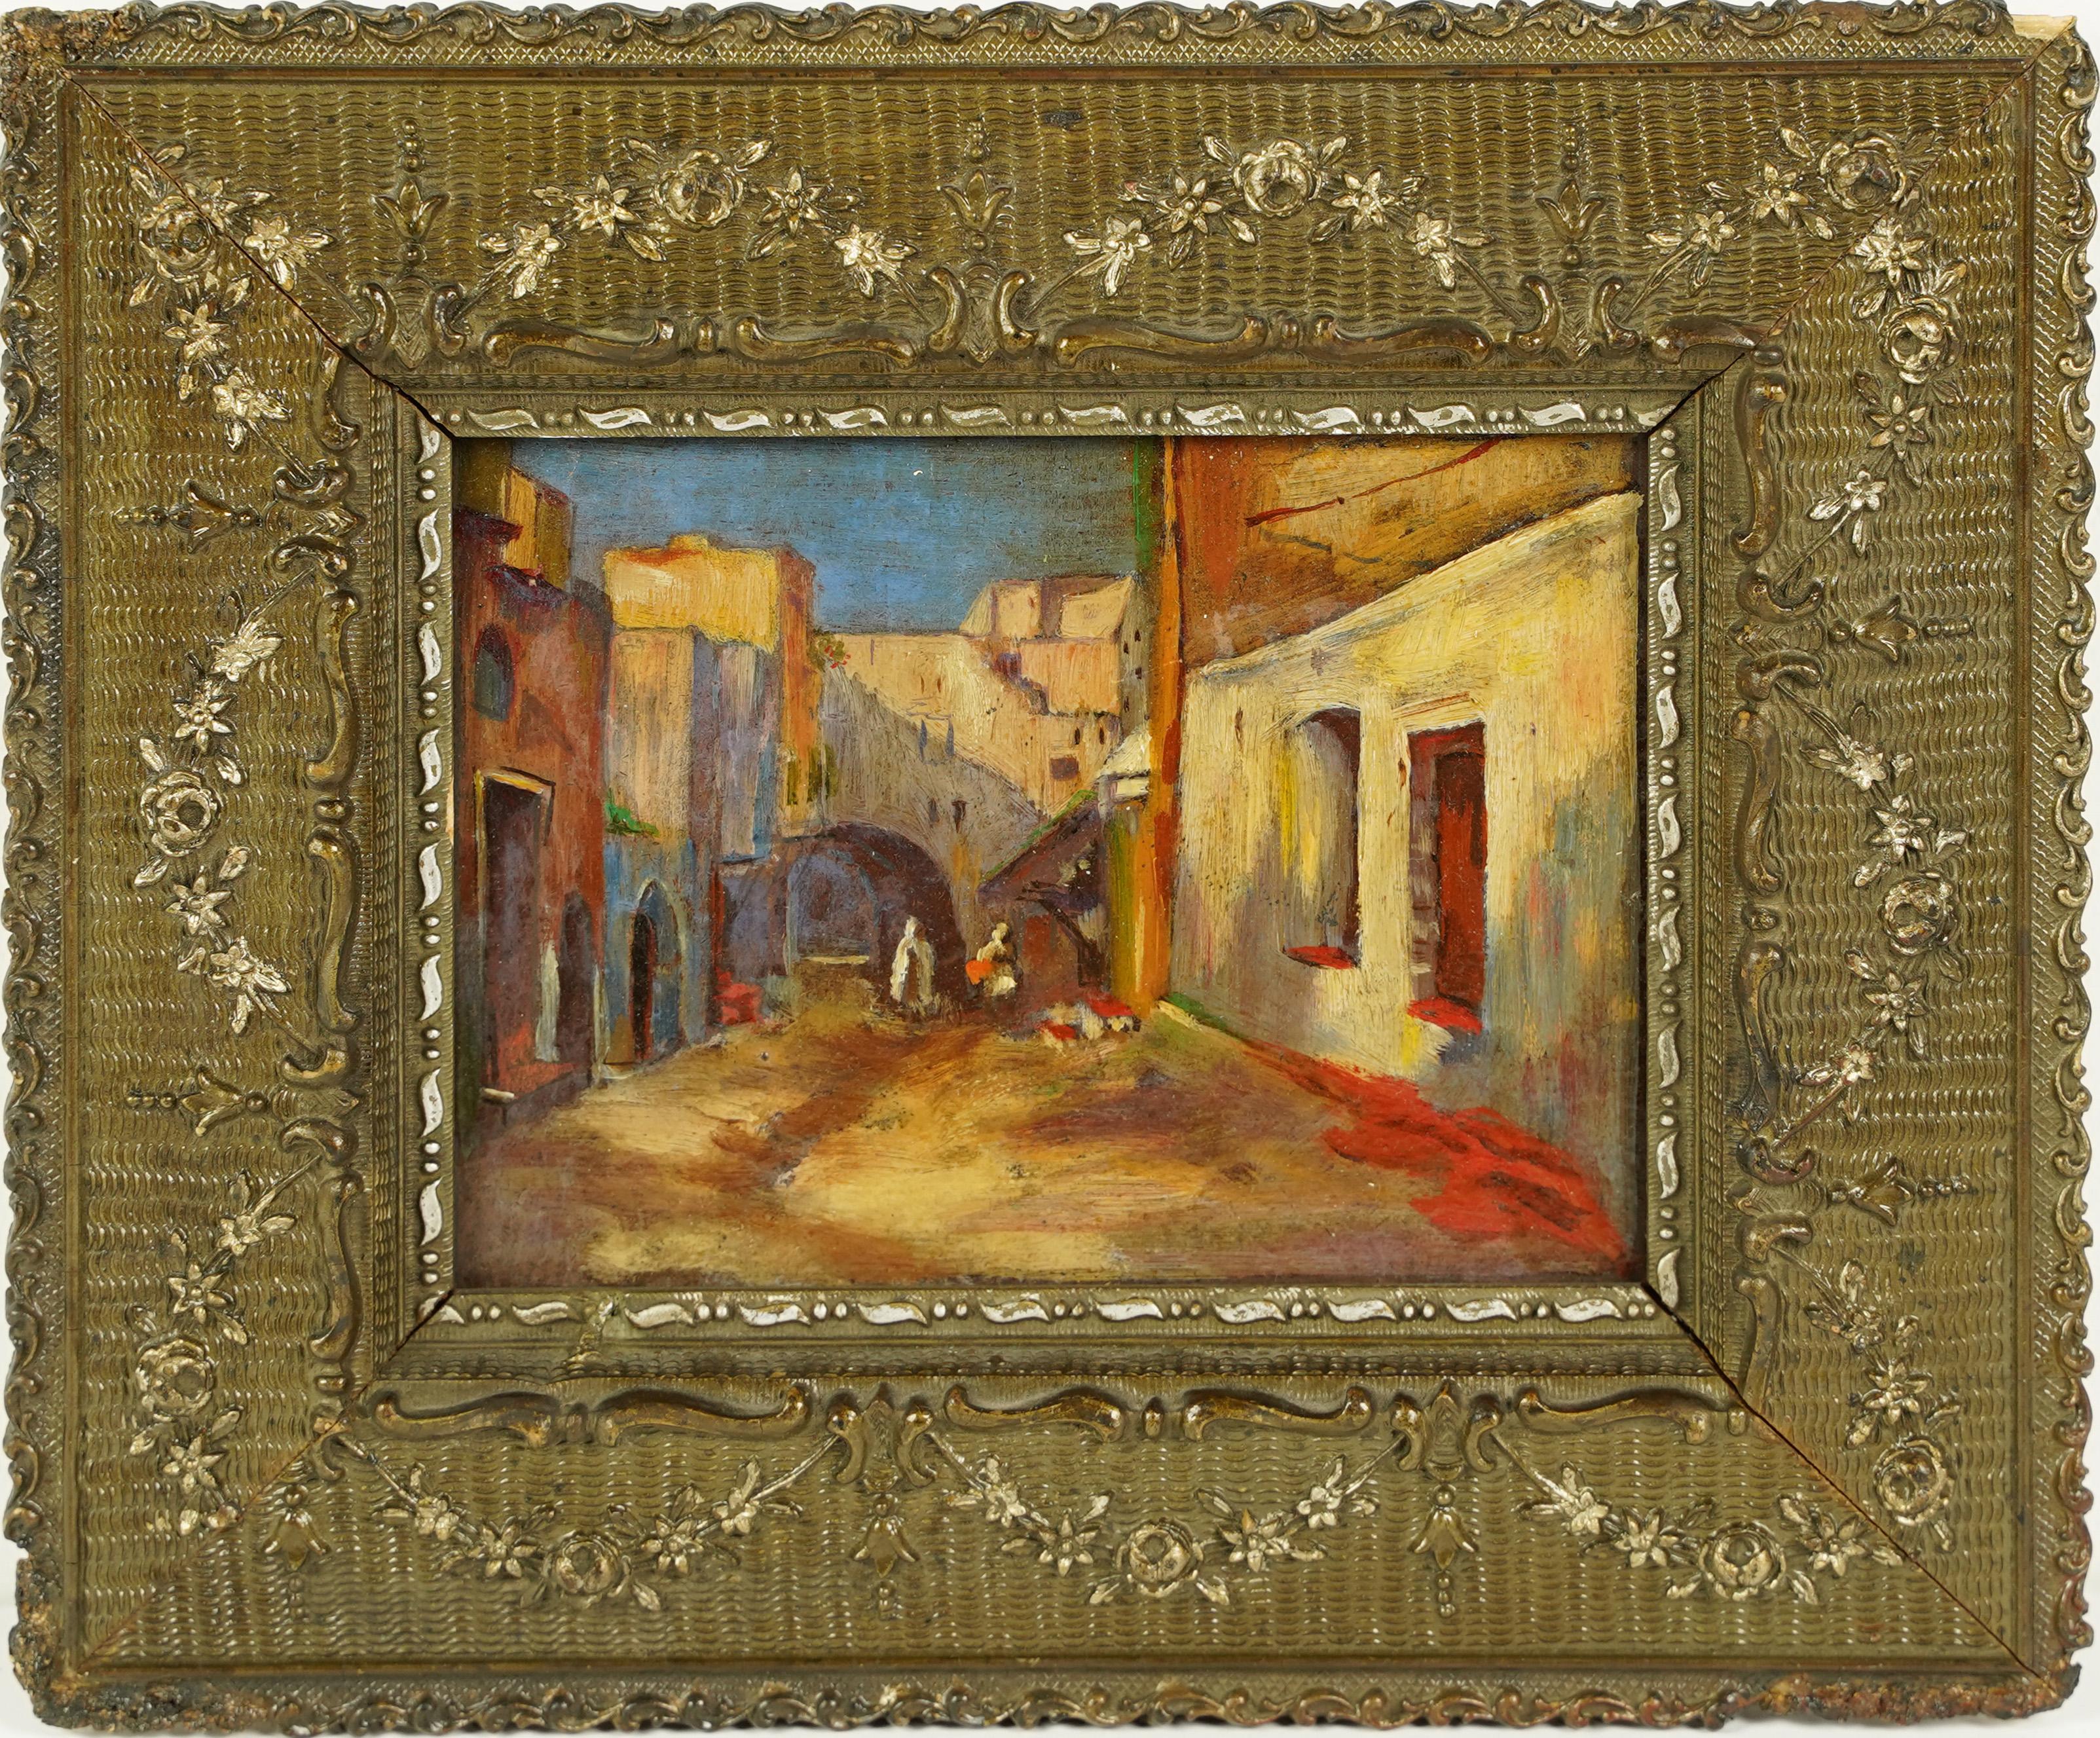 Antique American impressionist cityscape oil painting.  Oil on board.  No signature found.  Framed.  Image size, 7L x 5H.